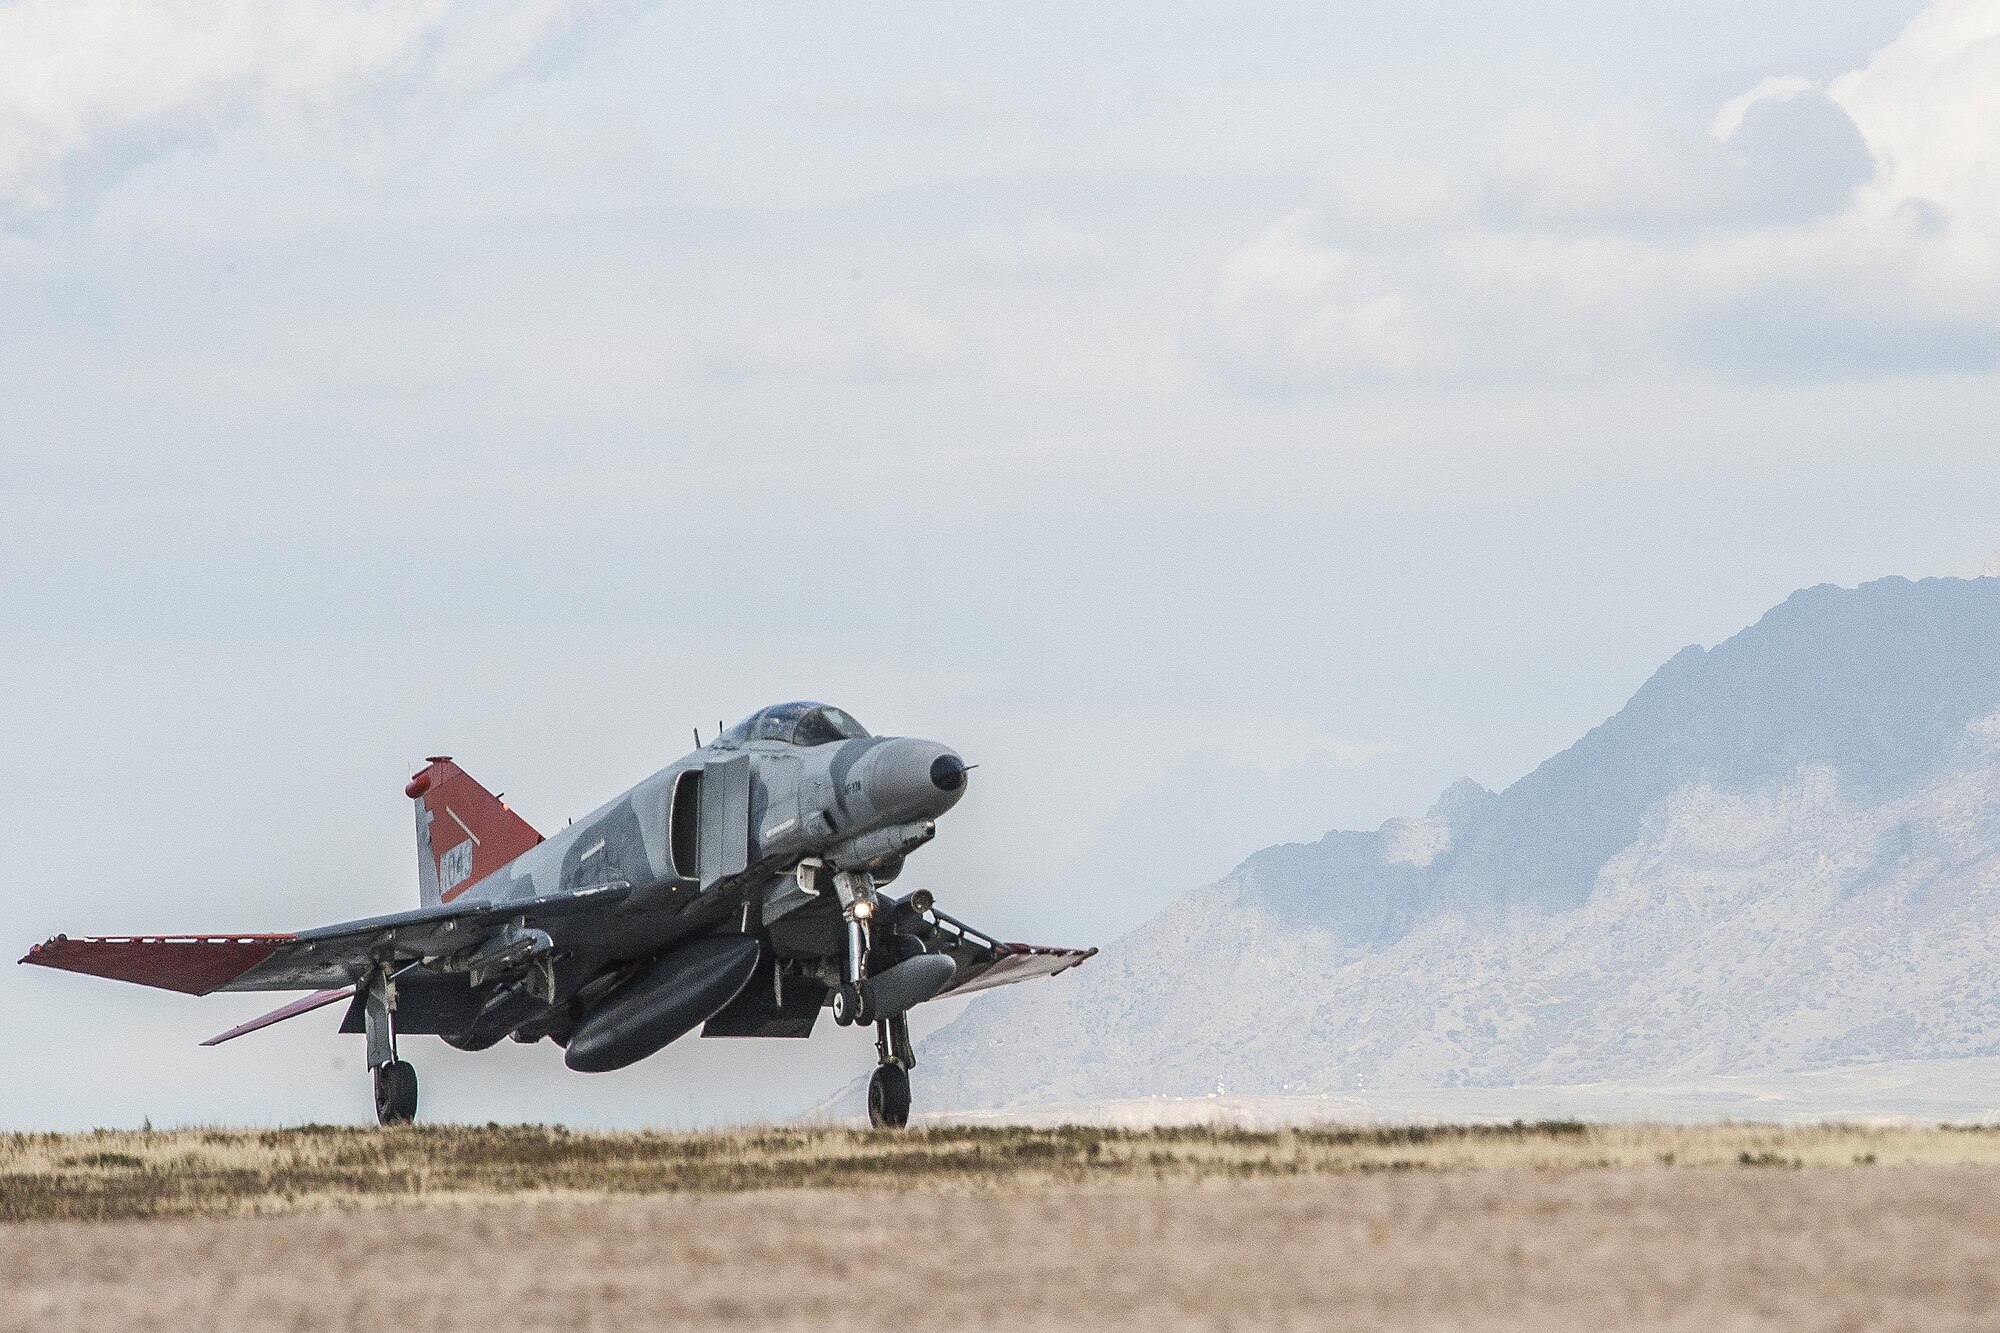 A QF-4 Aerial Target aircraft in manned configuration, piloted by Lt. Col. Ron King, 82nd Aerial Targets Squadron, Detachment 1 commander, arrives at Hill Air Force Base, Oct. 25. (U.S. Air Force photo by Paul Holcomb)